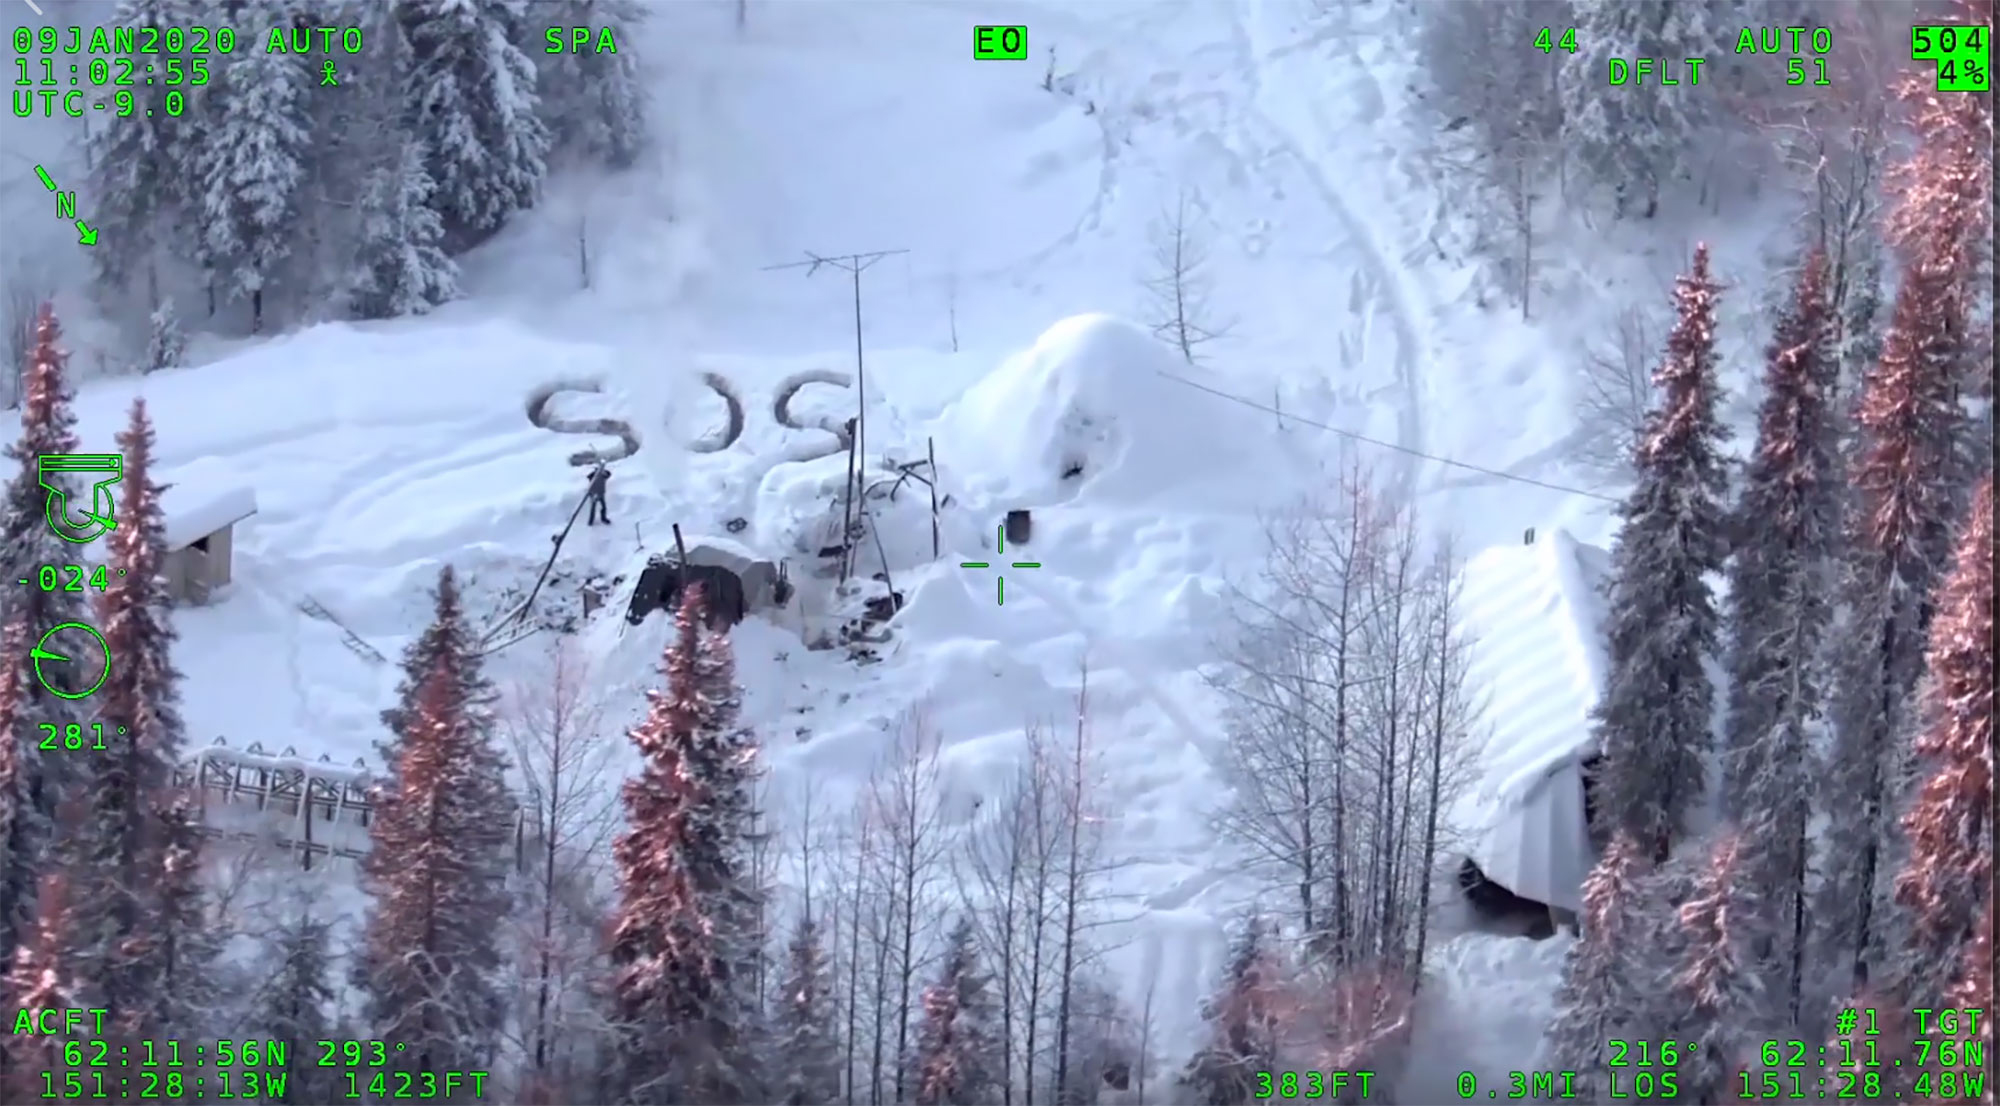 Helo 3 pilot Cliff Gilliland and Tactical Flight Officer Zac Johnson located Tyson Steele waving his arms near a makeshift shelter. An SOS signal was stamped in the snow outside. 